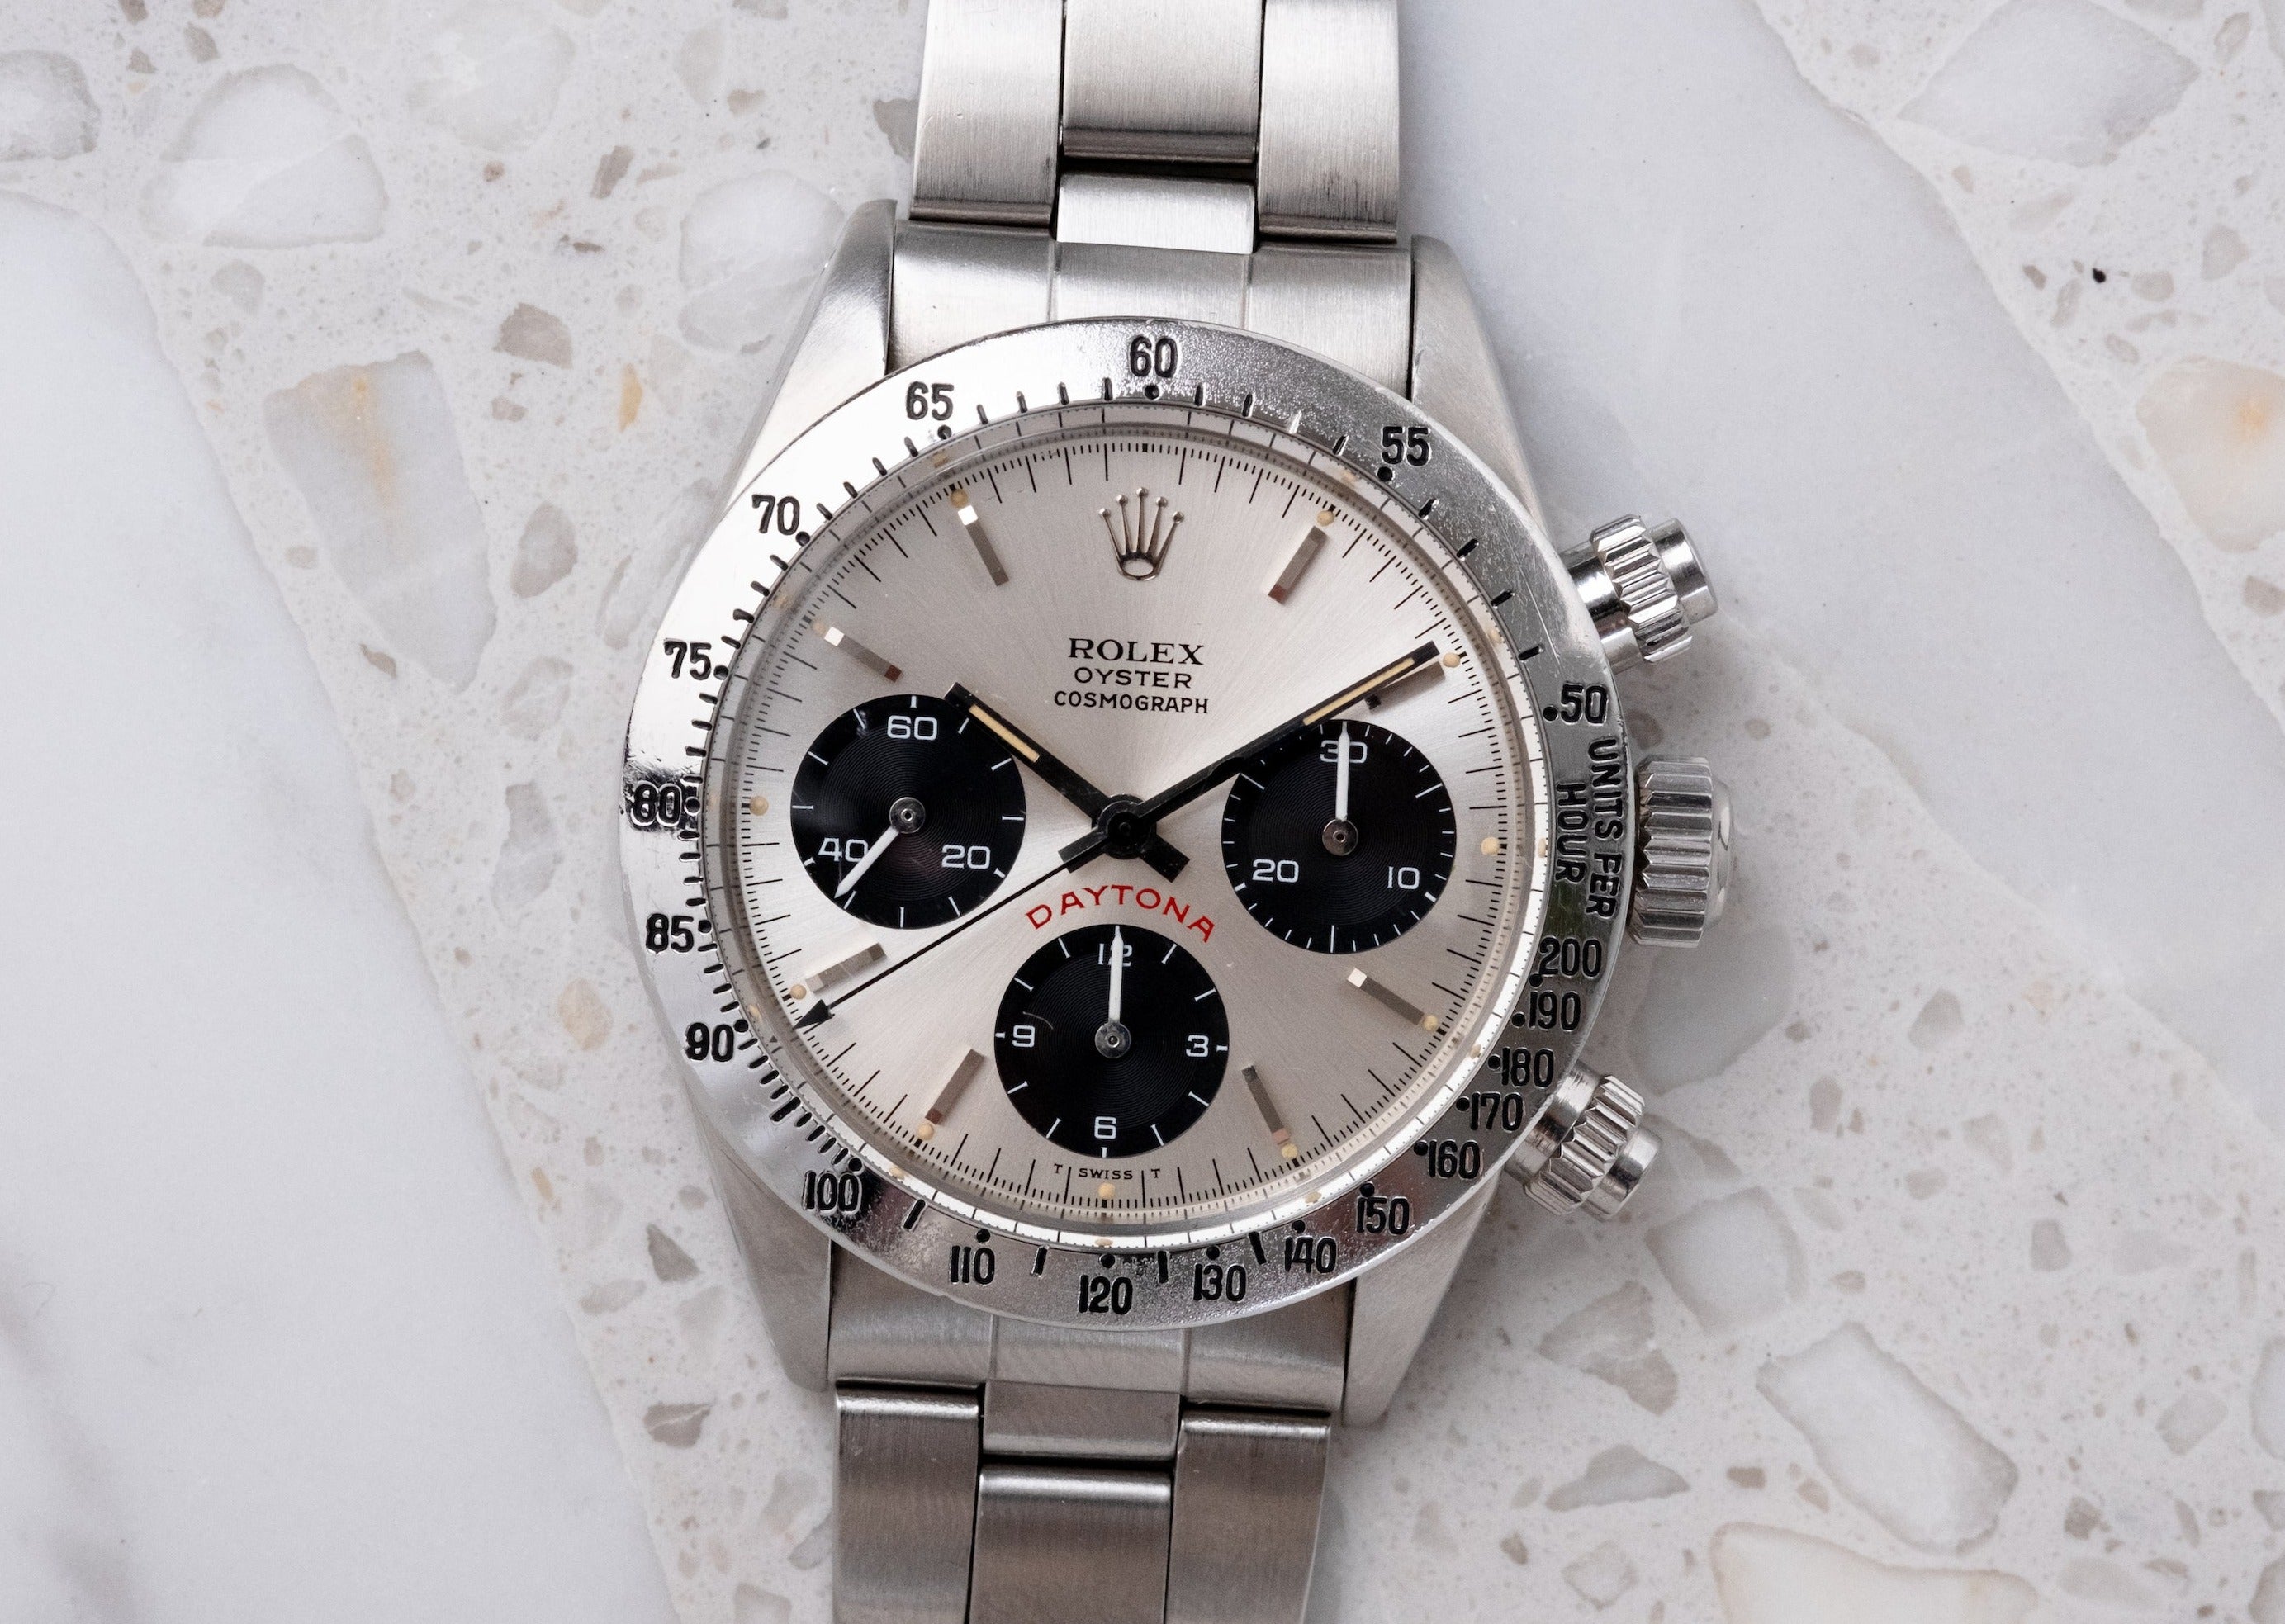 ROLEX Oyster Cosmograph Daytona Ref. 6265 Big Red Floating Dial (1976)